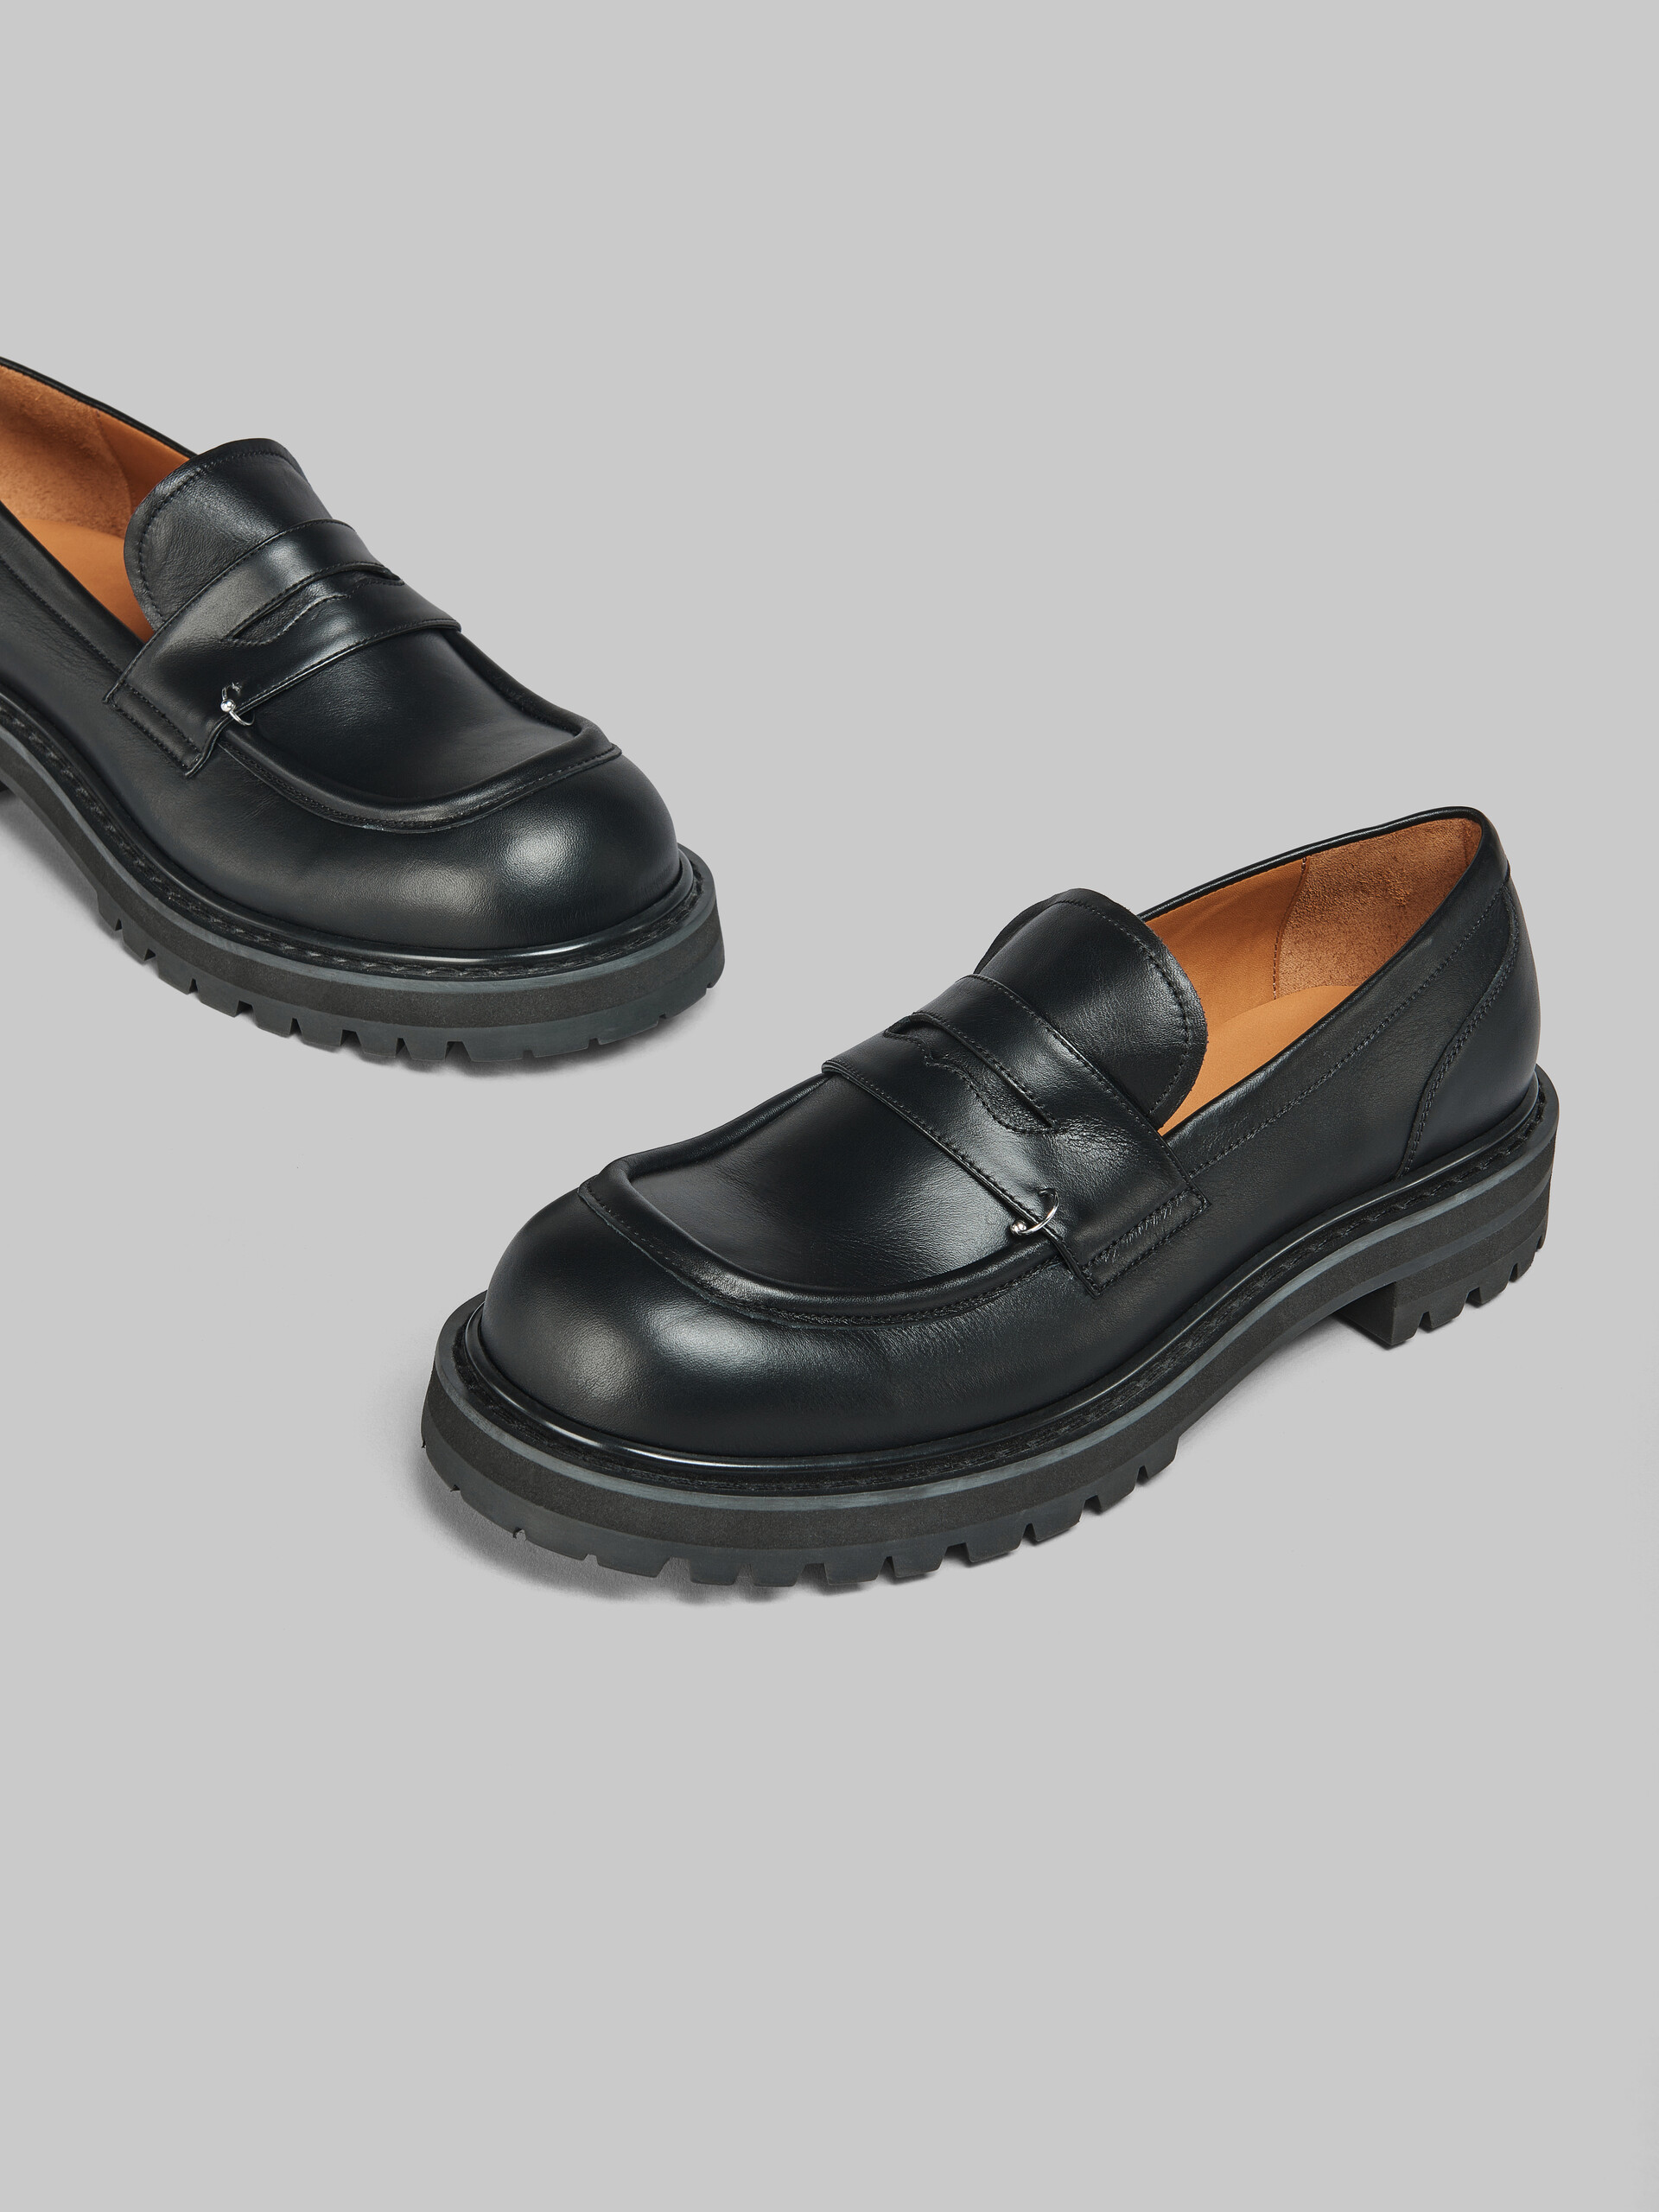 Black leather chunky loafer with piercings - Mocassin - Image 5